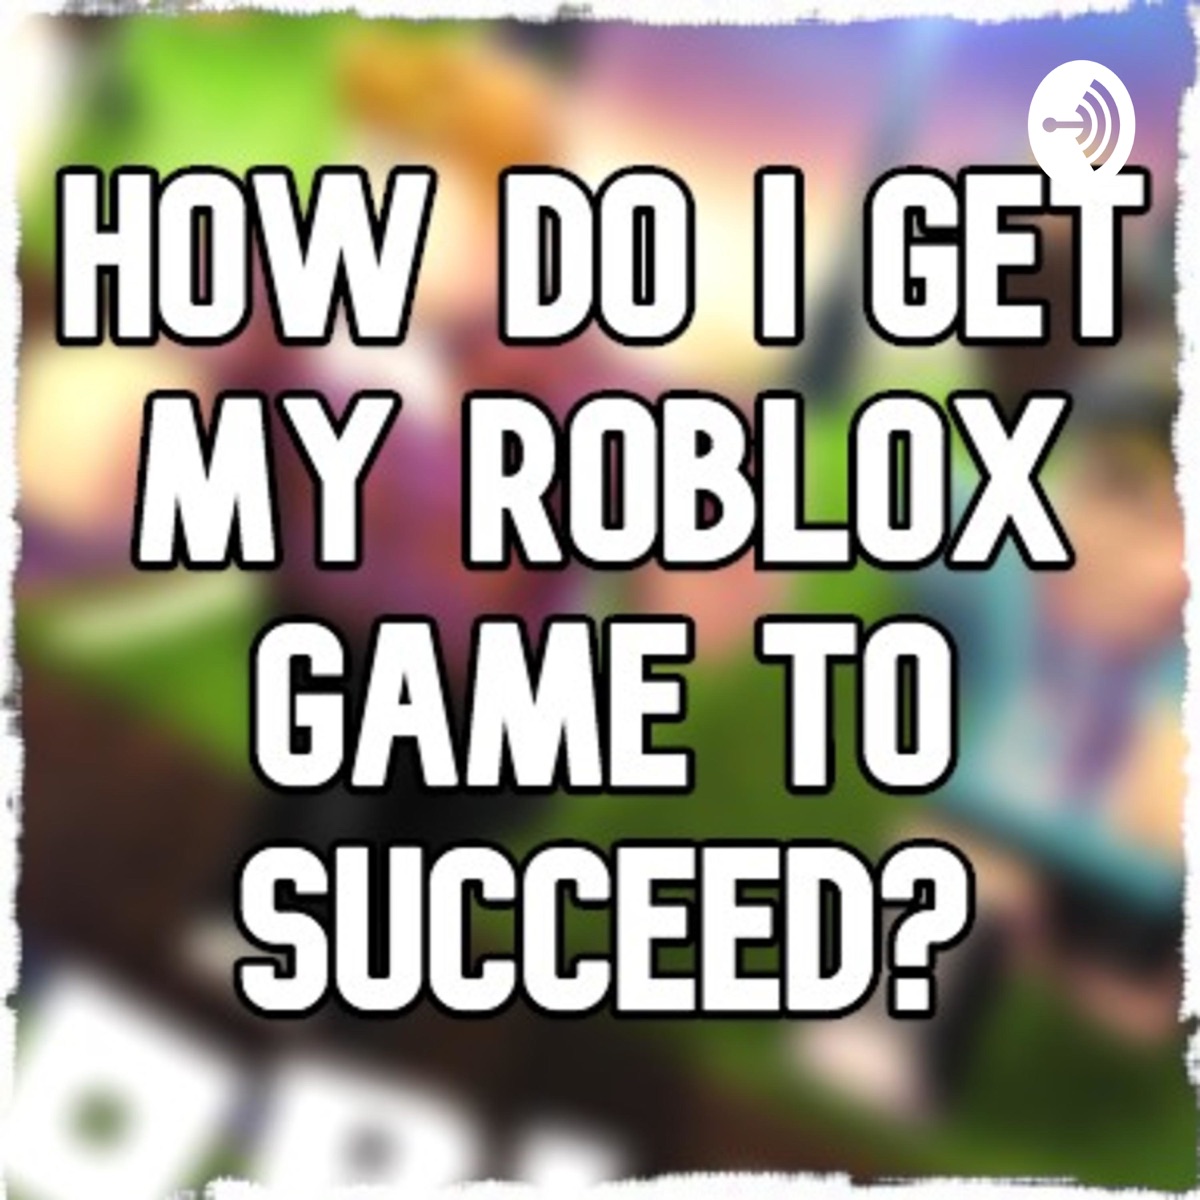 Related How Do I Make My Roblox Game Succeed Podcast Podtail - roblox radio chatter